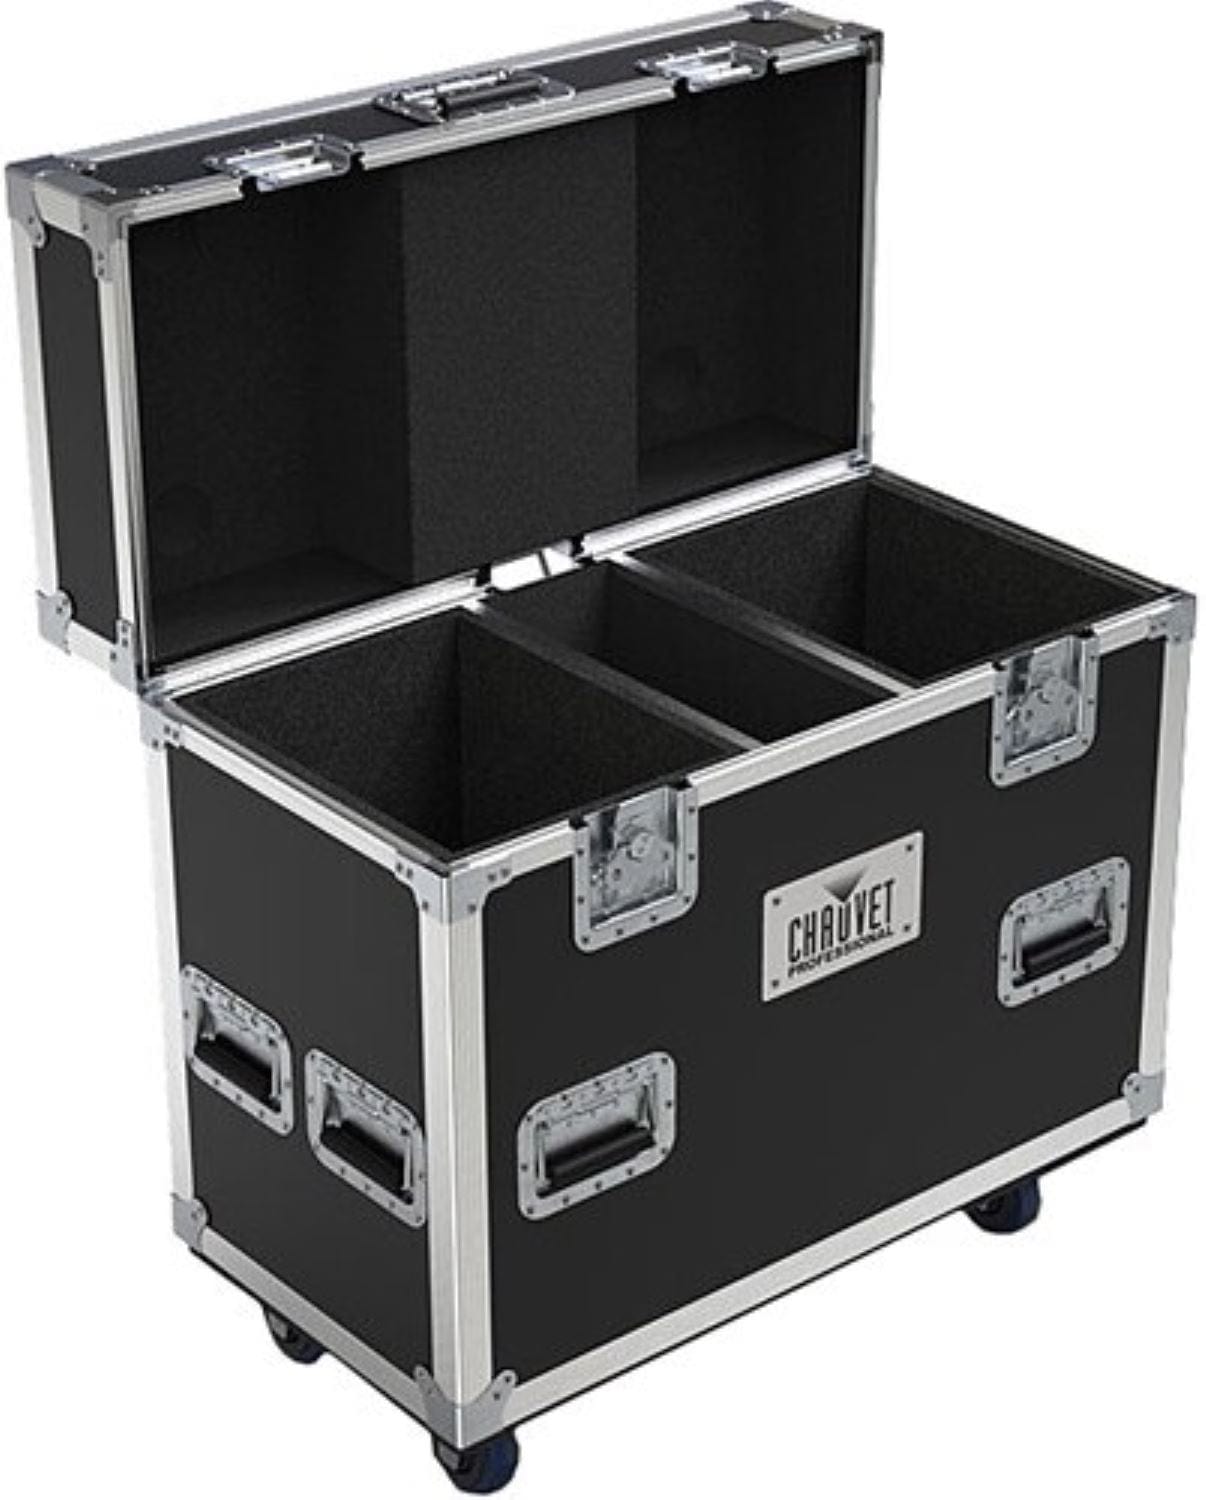 ChauvetPro CP2CASER1XSPOT 2-Fixture Roadcase for R1X Spot - PSSL ProSound and Stage Lighting